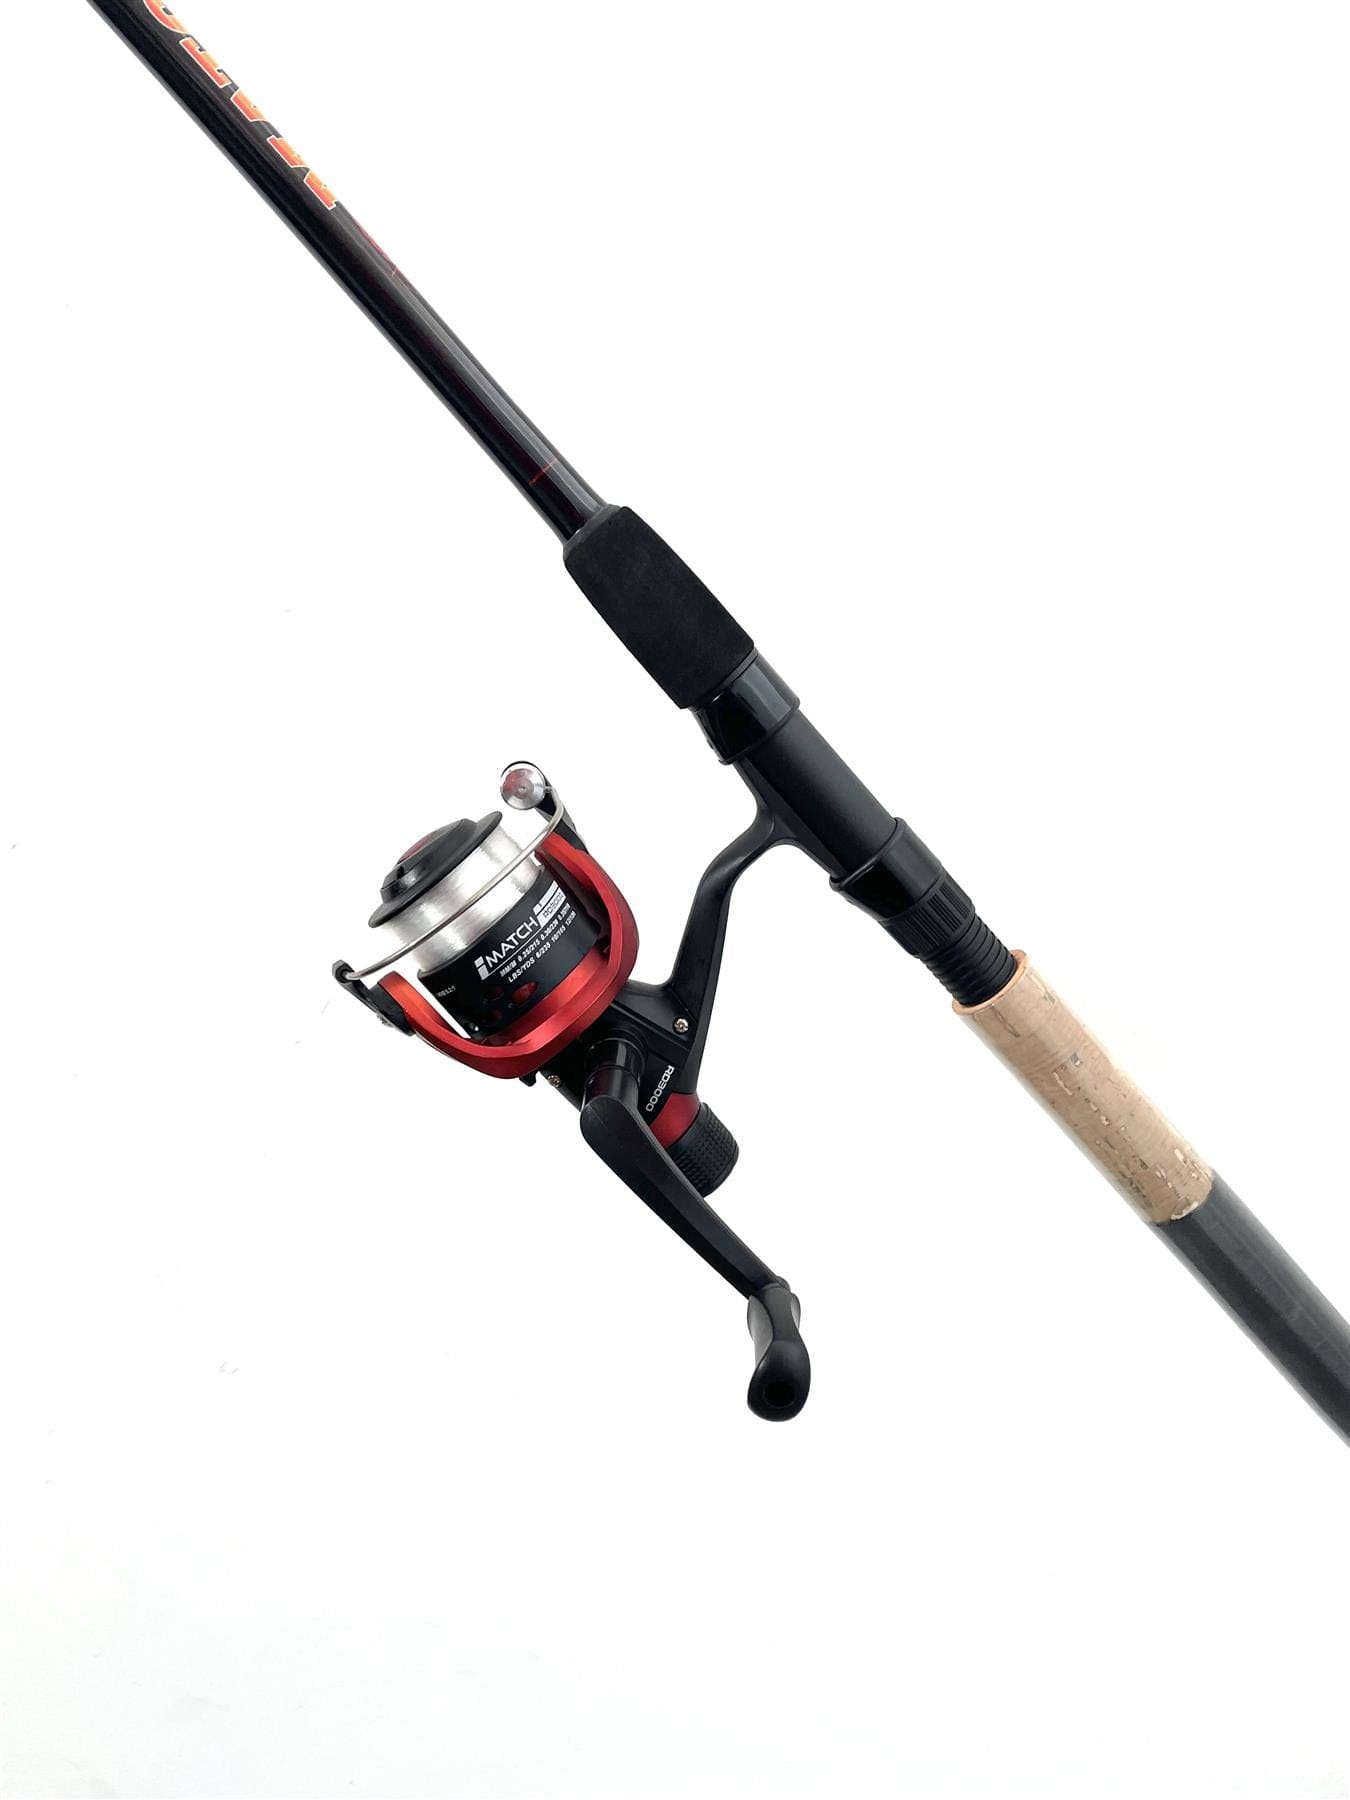 Shakespeare Firebird Tele Spin Combo Rod and Reel with Line - 7ft